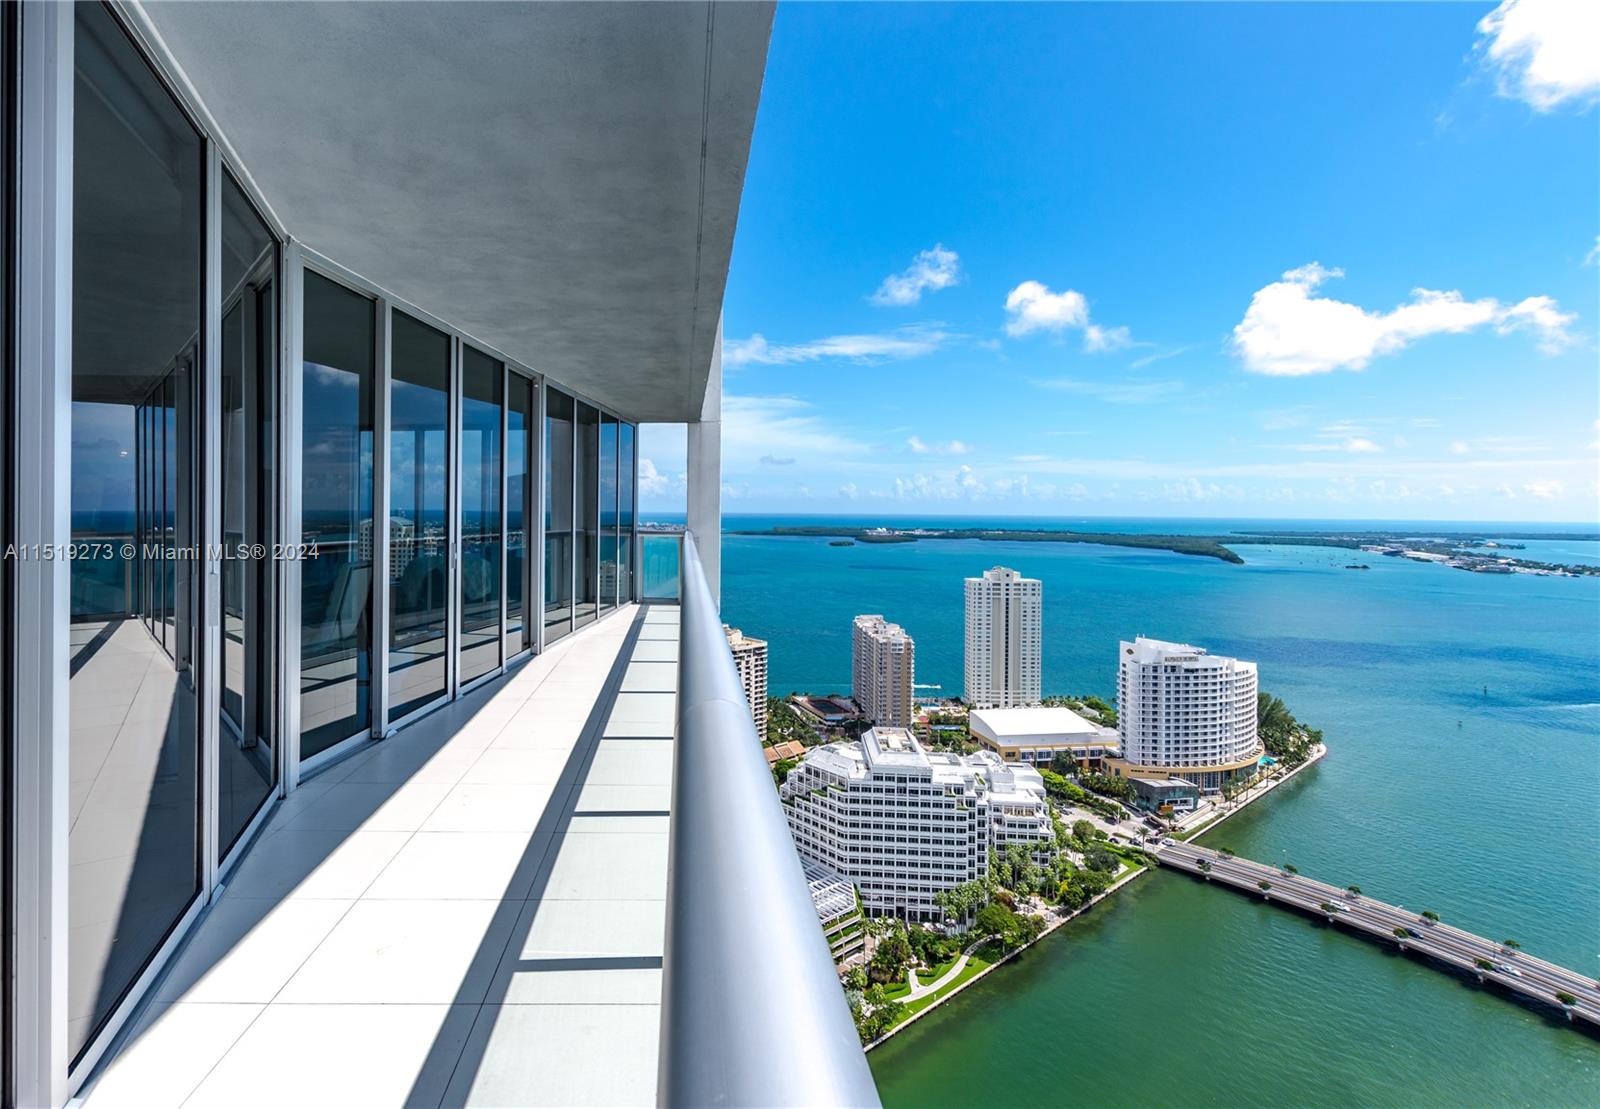 GORGEOUS 3 bed/2Bath! at Icon Brickell Top of the line,Amazing views from 49 Floor ,appliances,Amazing amenities5 Star amenities, spa, infinity pool,full gym , individual private residences that are close to the Miami Lifestyle ,South Miami Avenue access from a prestigious Brickell Avenue address,walking distance to restaurants and shops, including the Mary Brickell Village and the Brickell City Center, easy access to private parking facilities for its residents. BASIC CABLE AND INTERNET INCLUDED AS PER CONDO ASSOCIATION